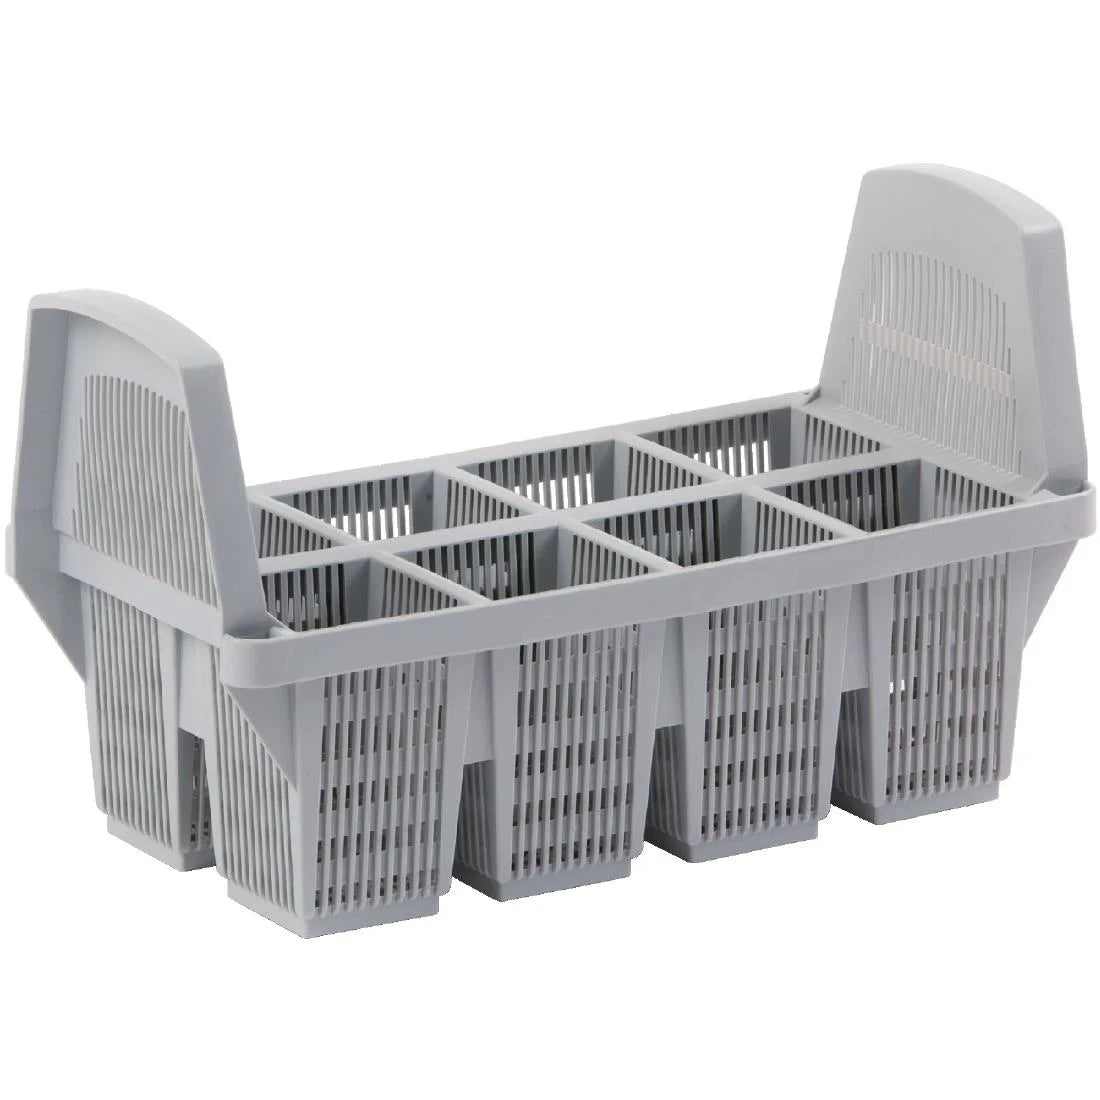 Classeq Ware Washer Cutlery Basket.Product Ref:00688.Model: CF627. 🚚 1-3 Days Delivery